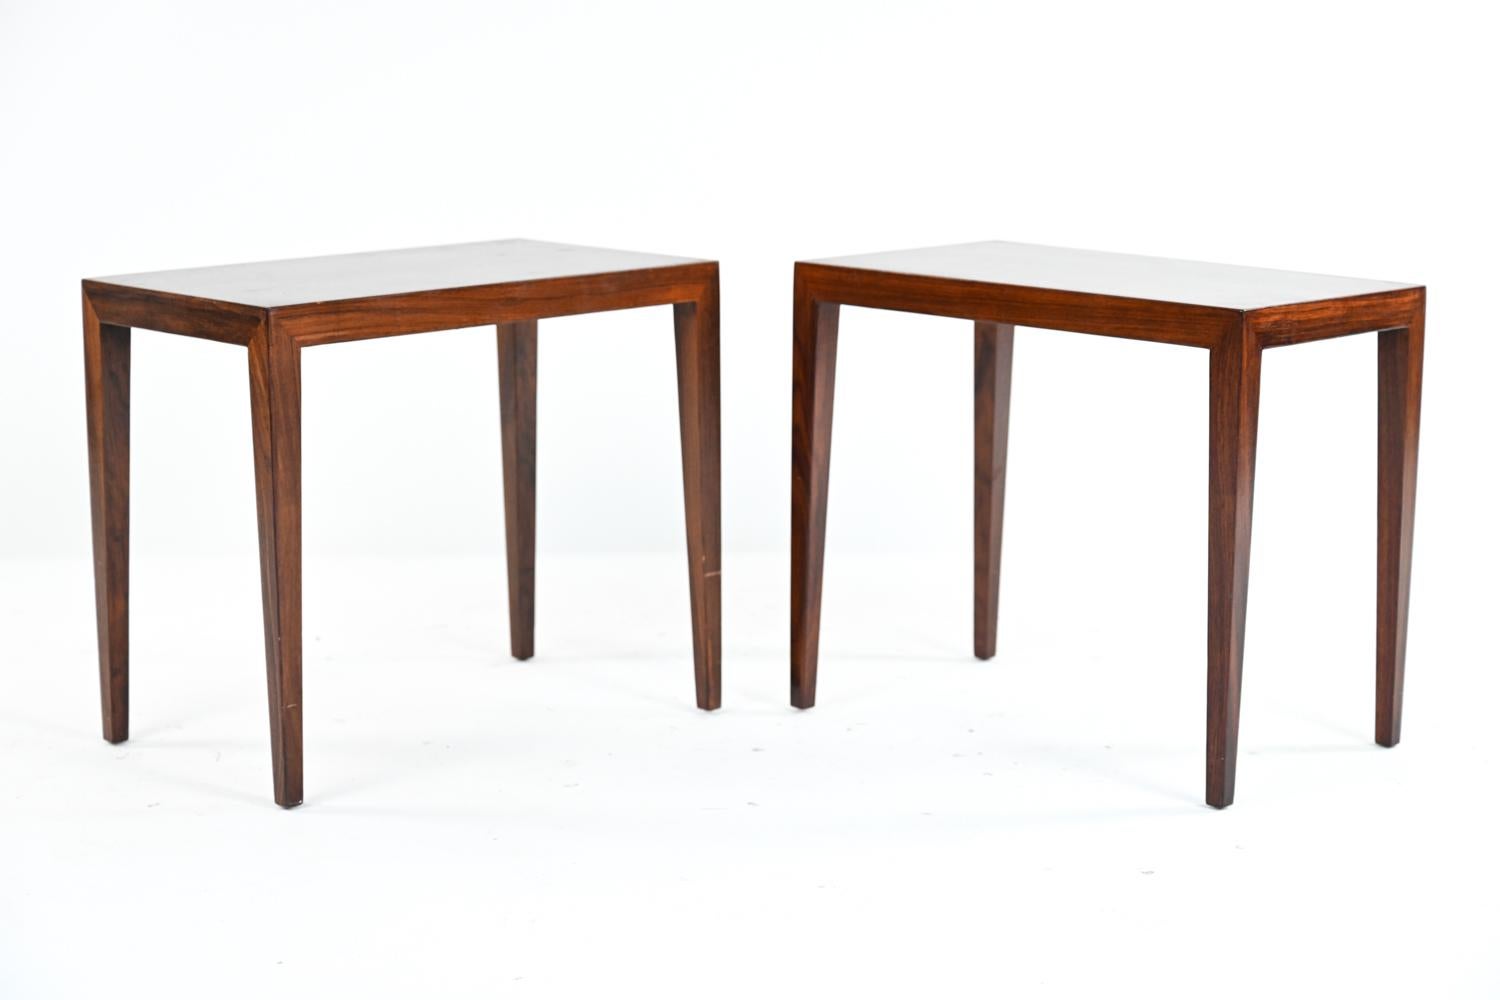 A stylish pair of Danish mid-century tables in rich rosewood with exquisite grain designed by Severin Hansen for Haslev, 1960's. A simple yet attractive form with tapered legs and well-designed proportions. One retaining Danish control label